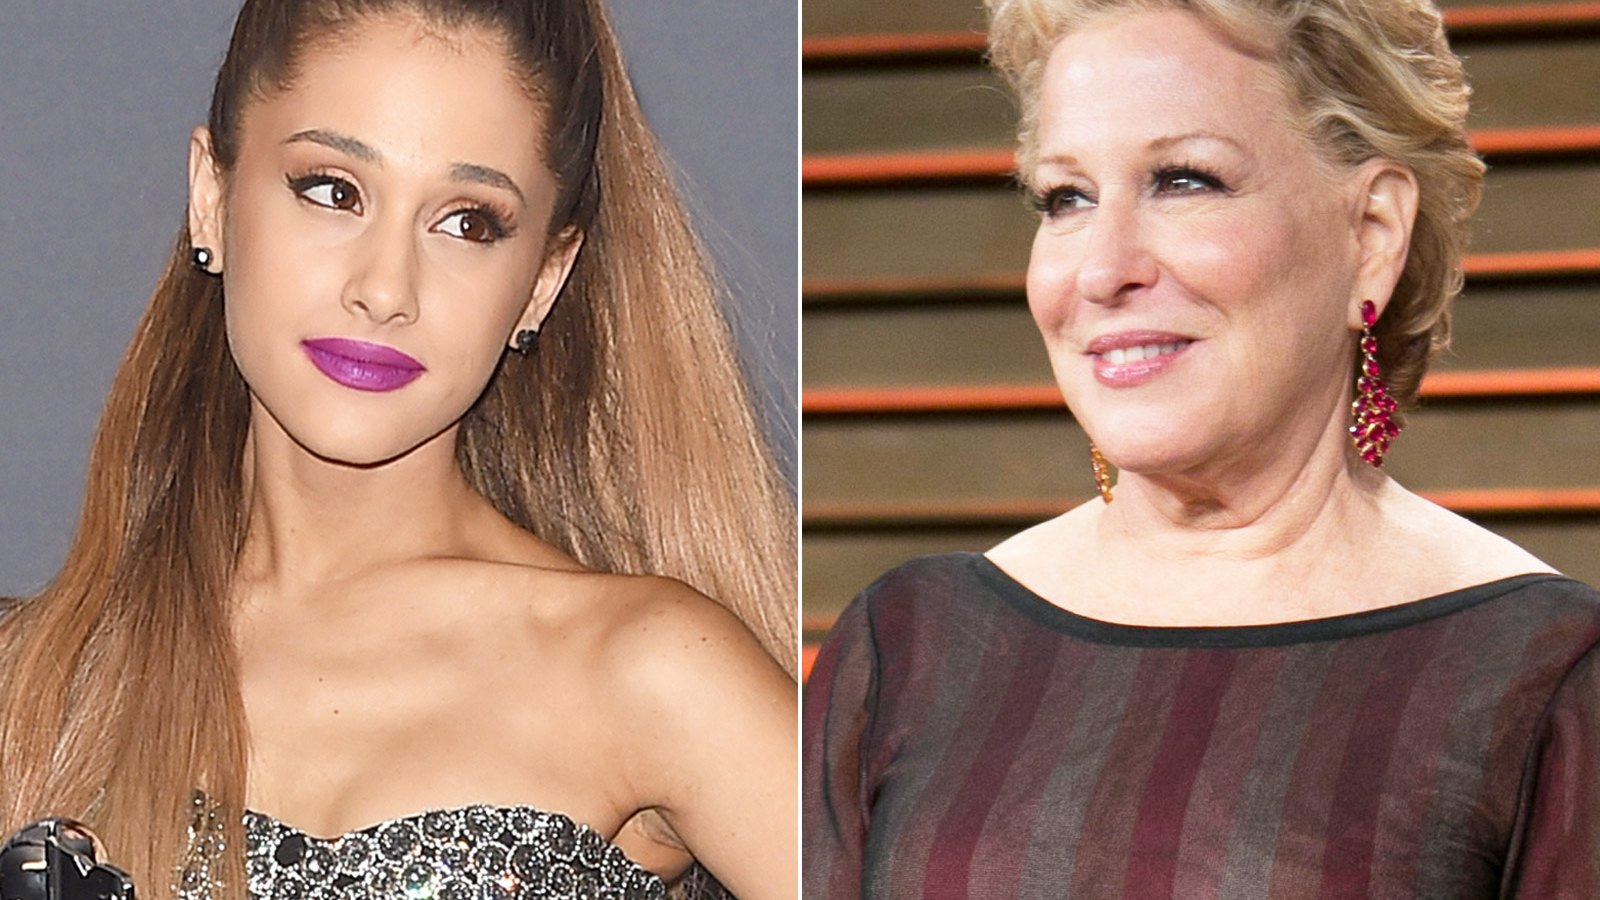 Ariana Grande and Bette Midler